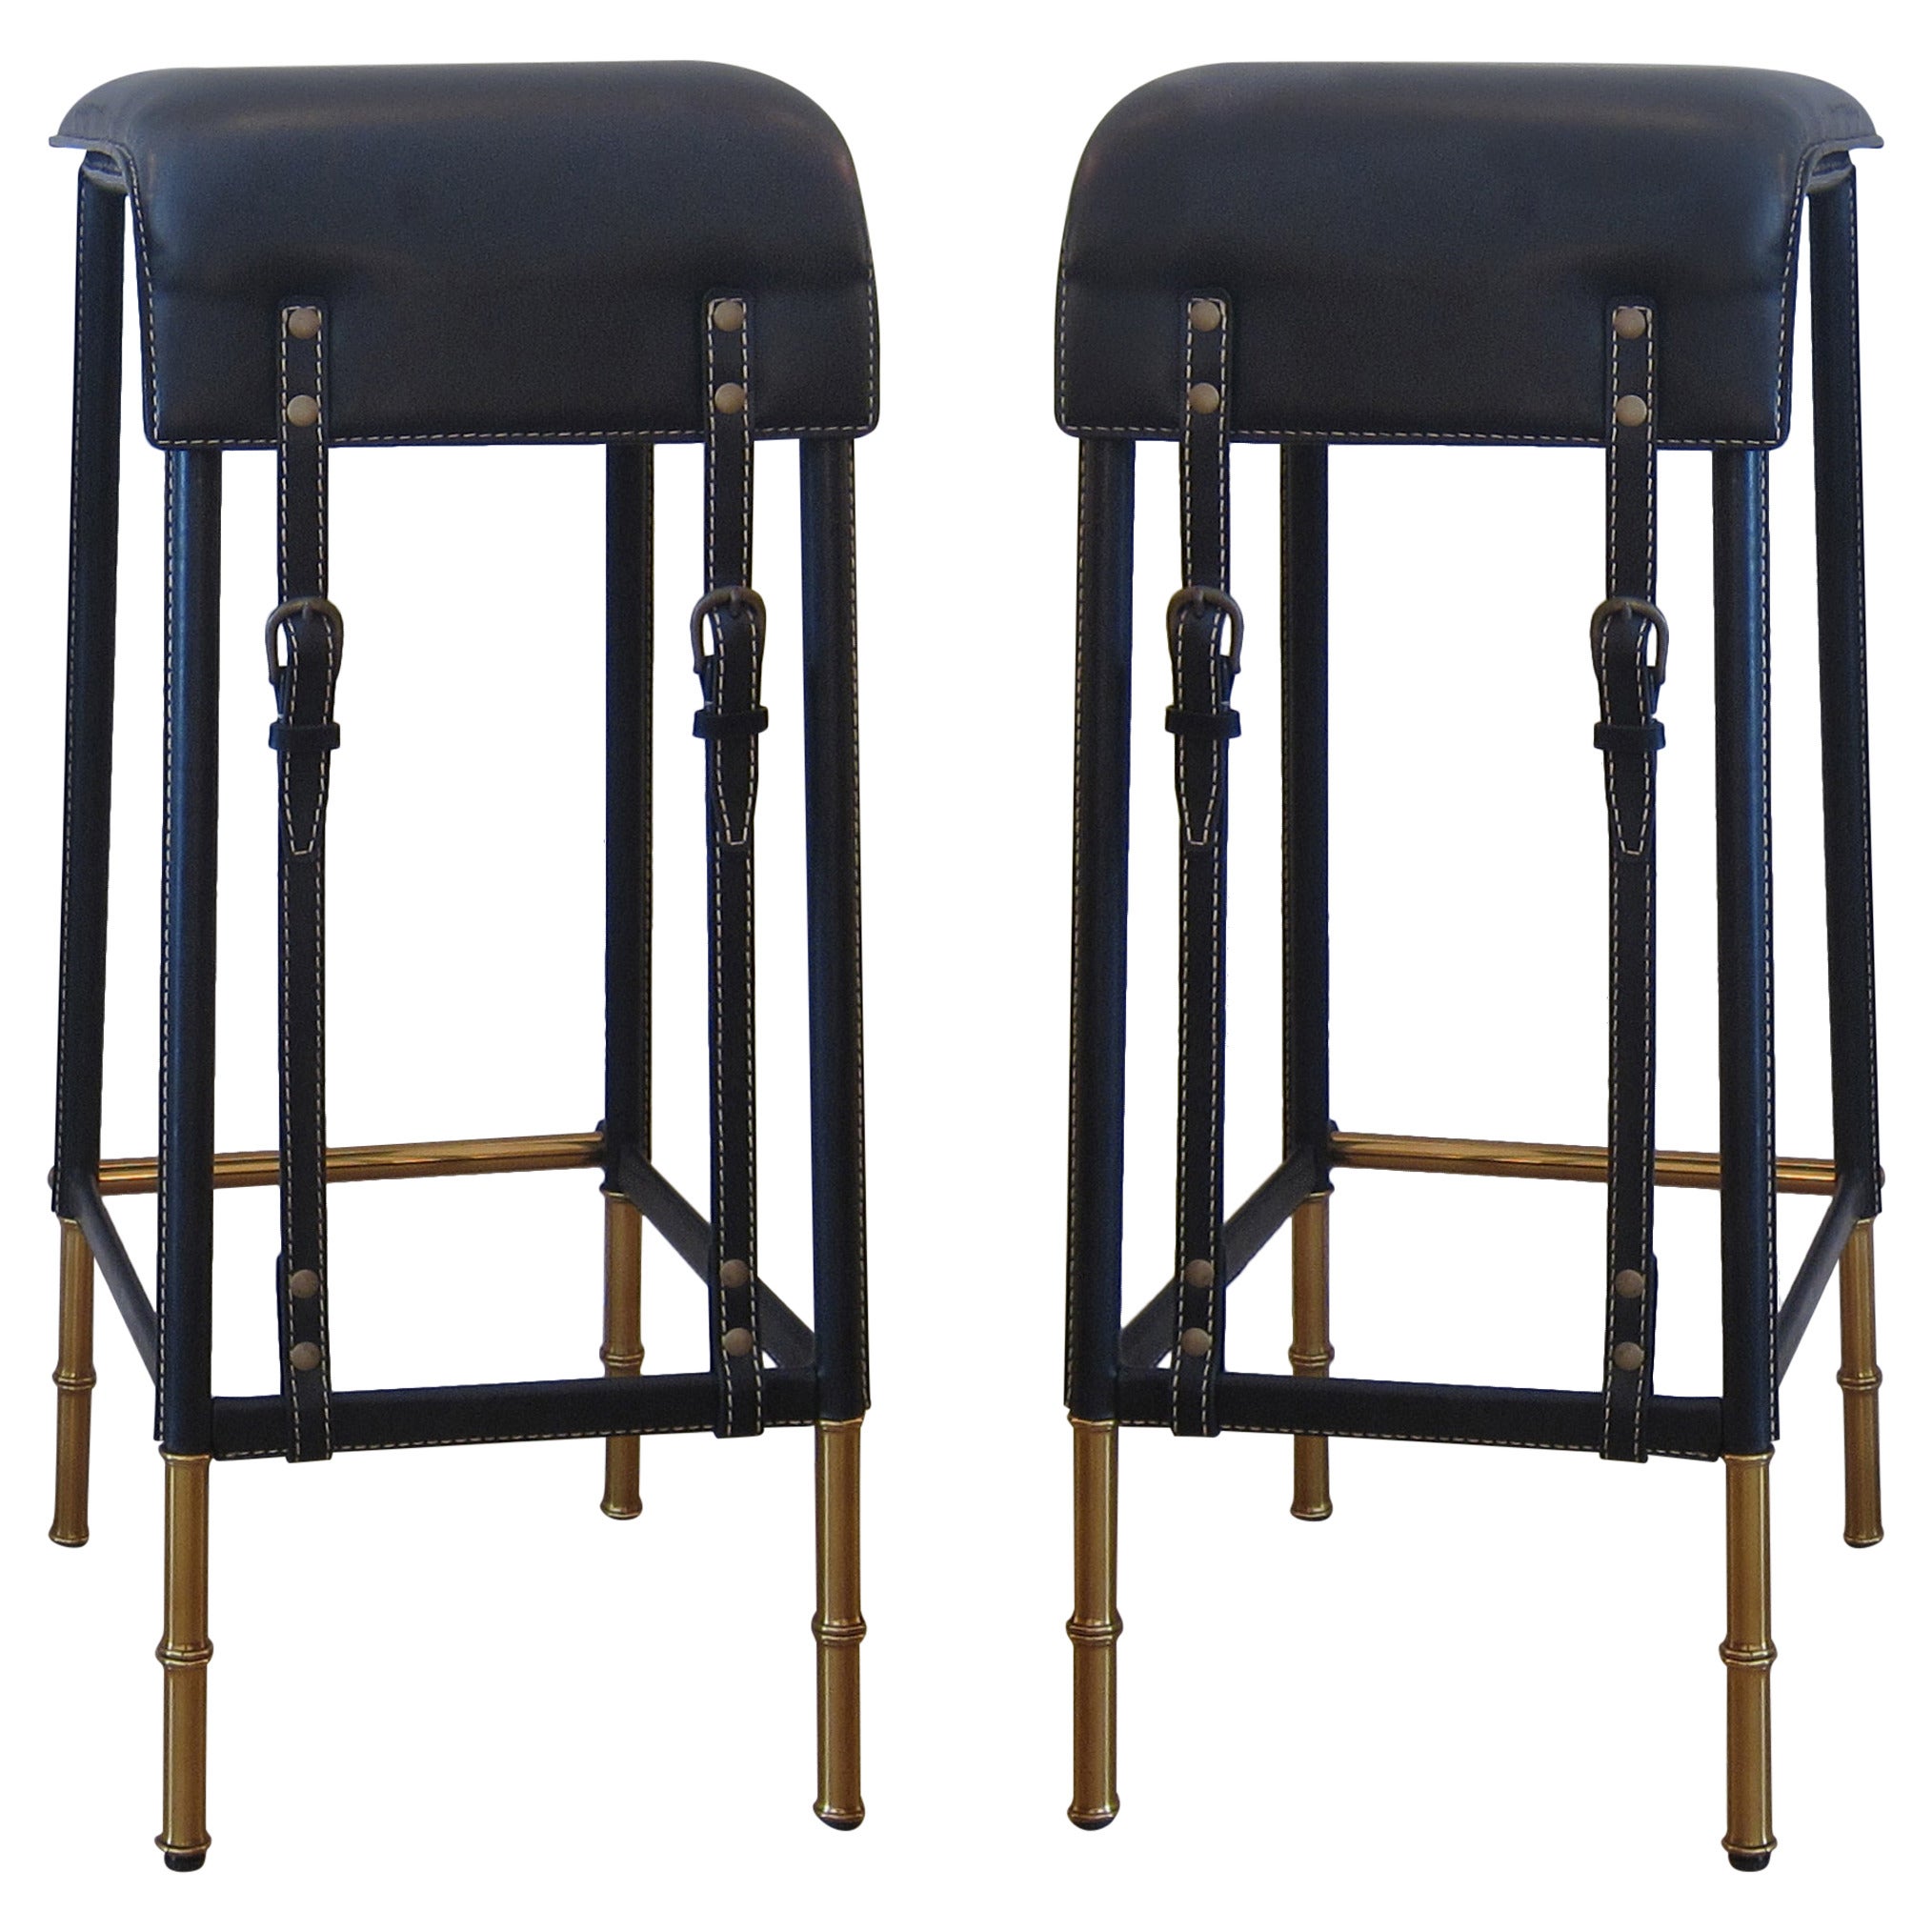 Pair of Black Stitched Leather Bar Stools by Jacques Adnet.